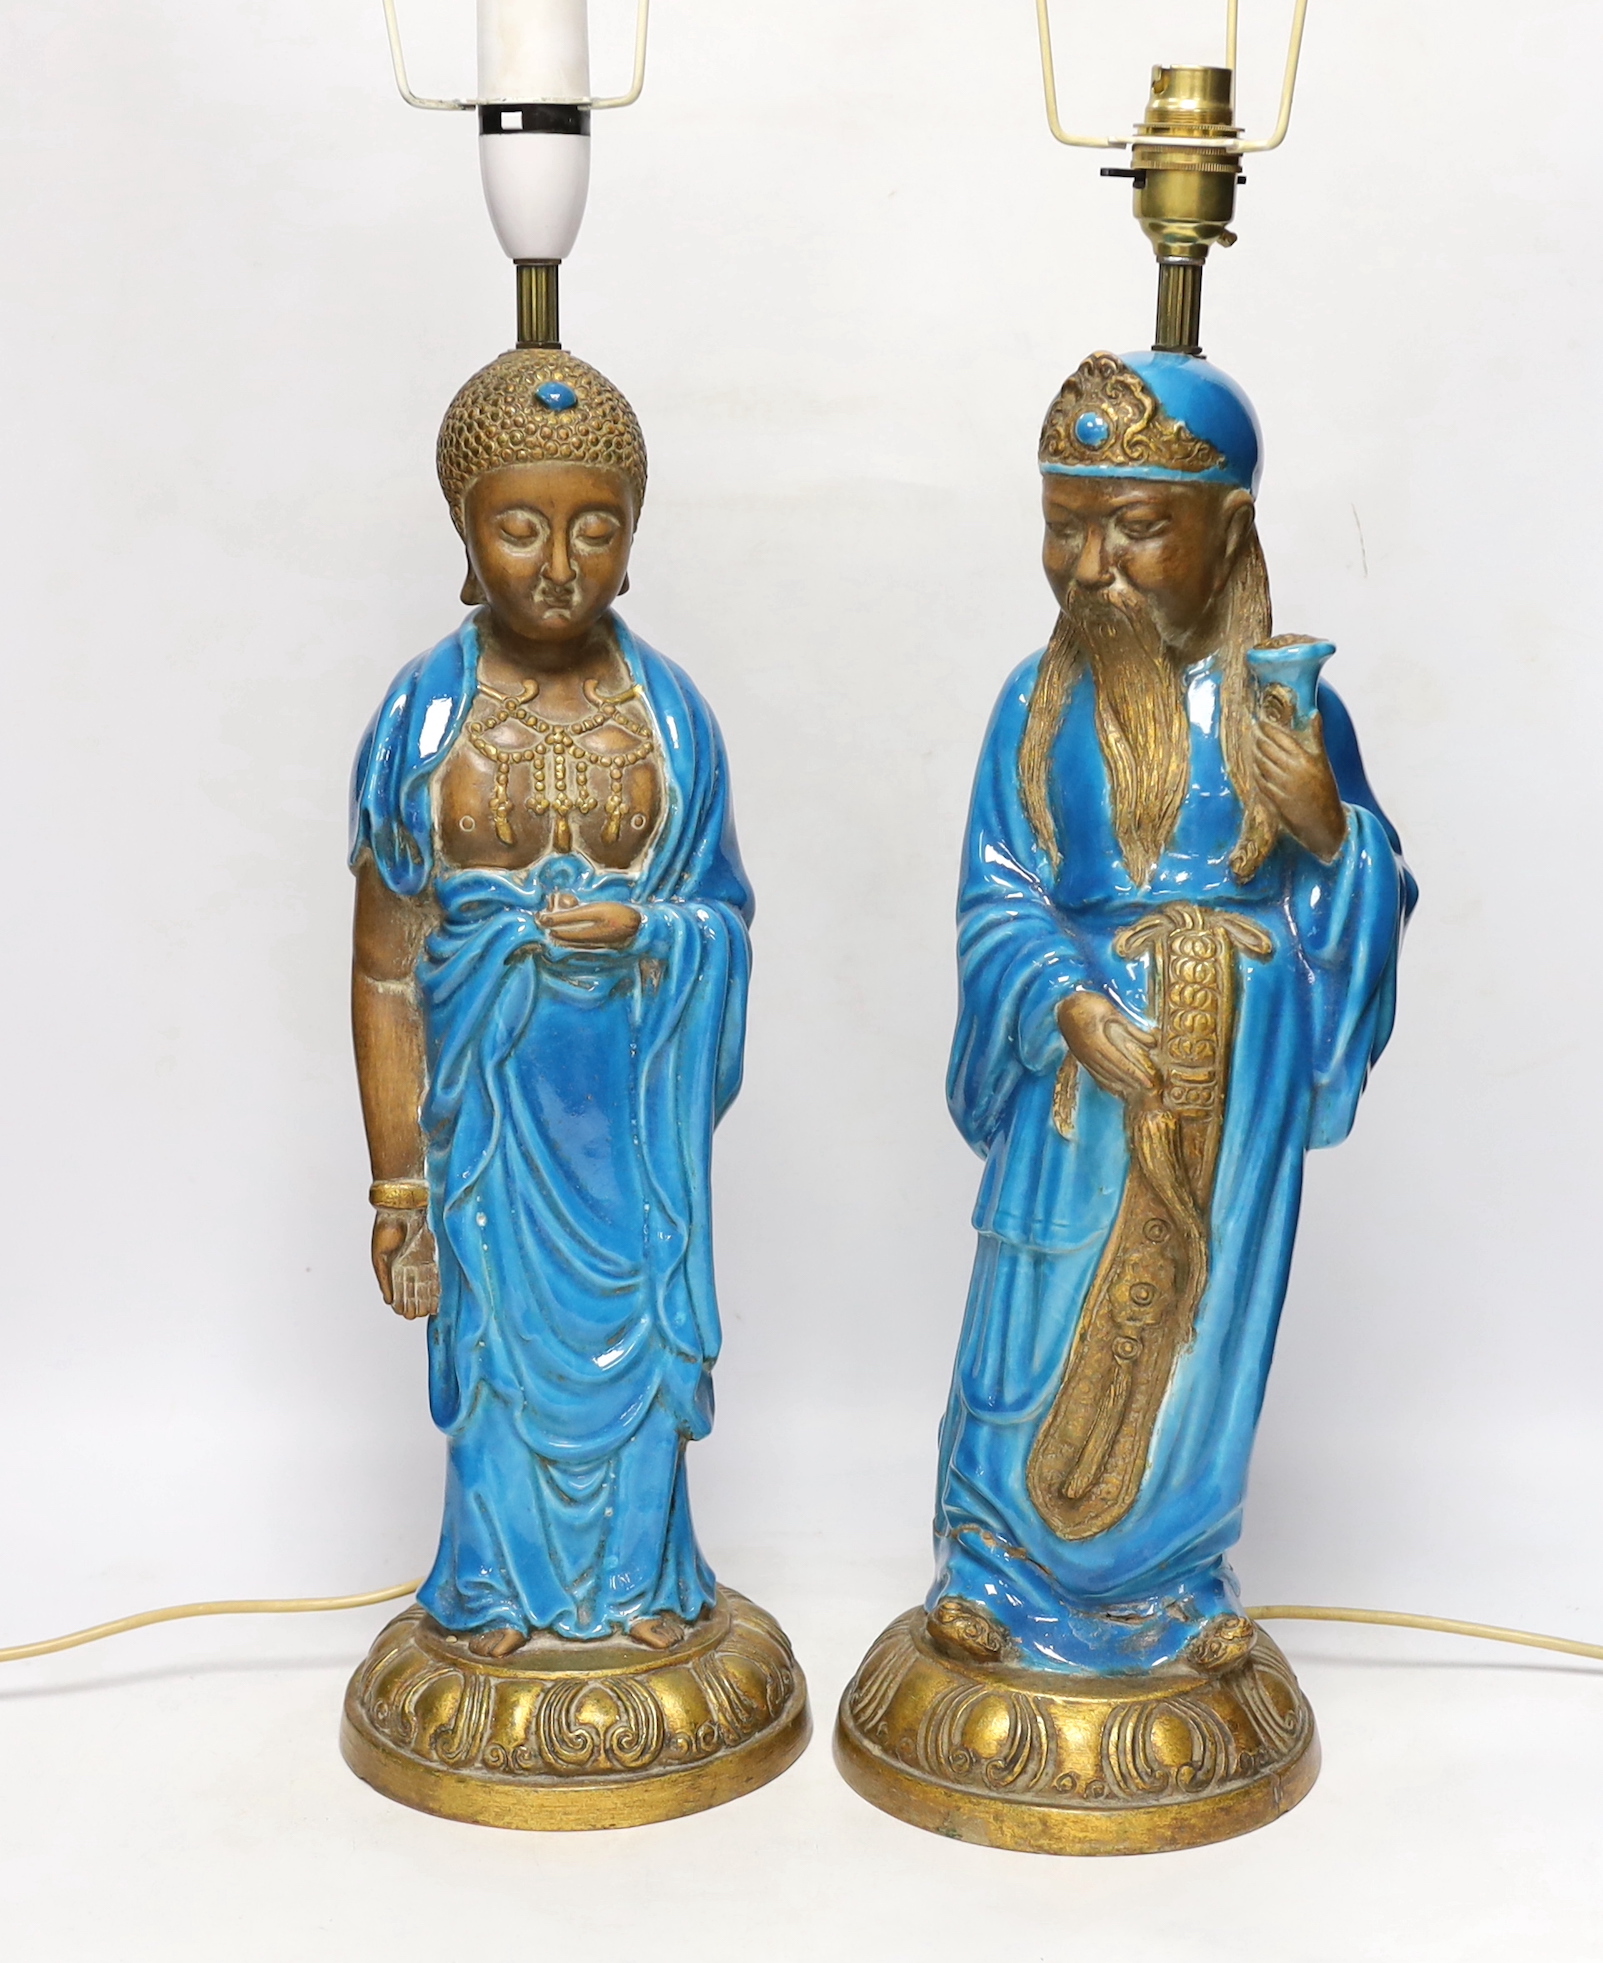 Two Chinese decoratively glazed and gilded pottery figures converted to lamp bases, approximately 44cm high